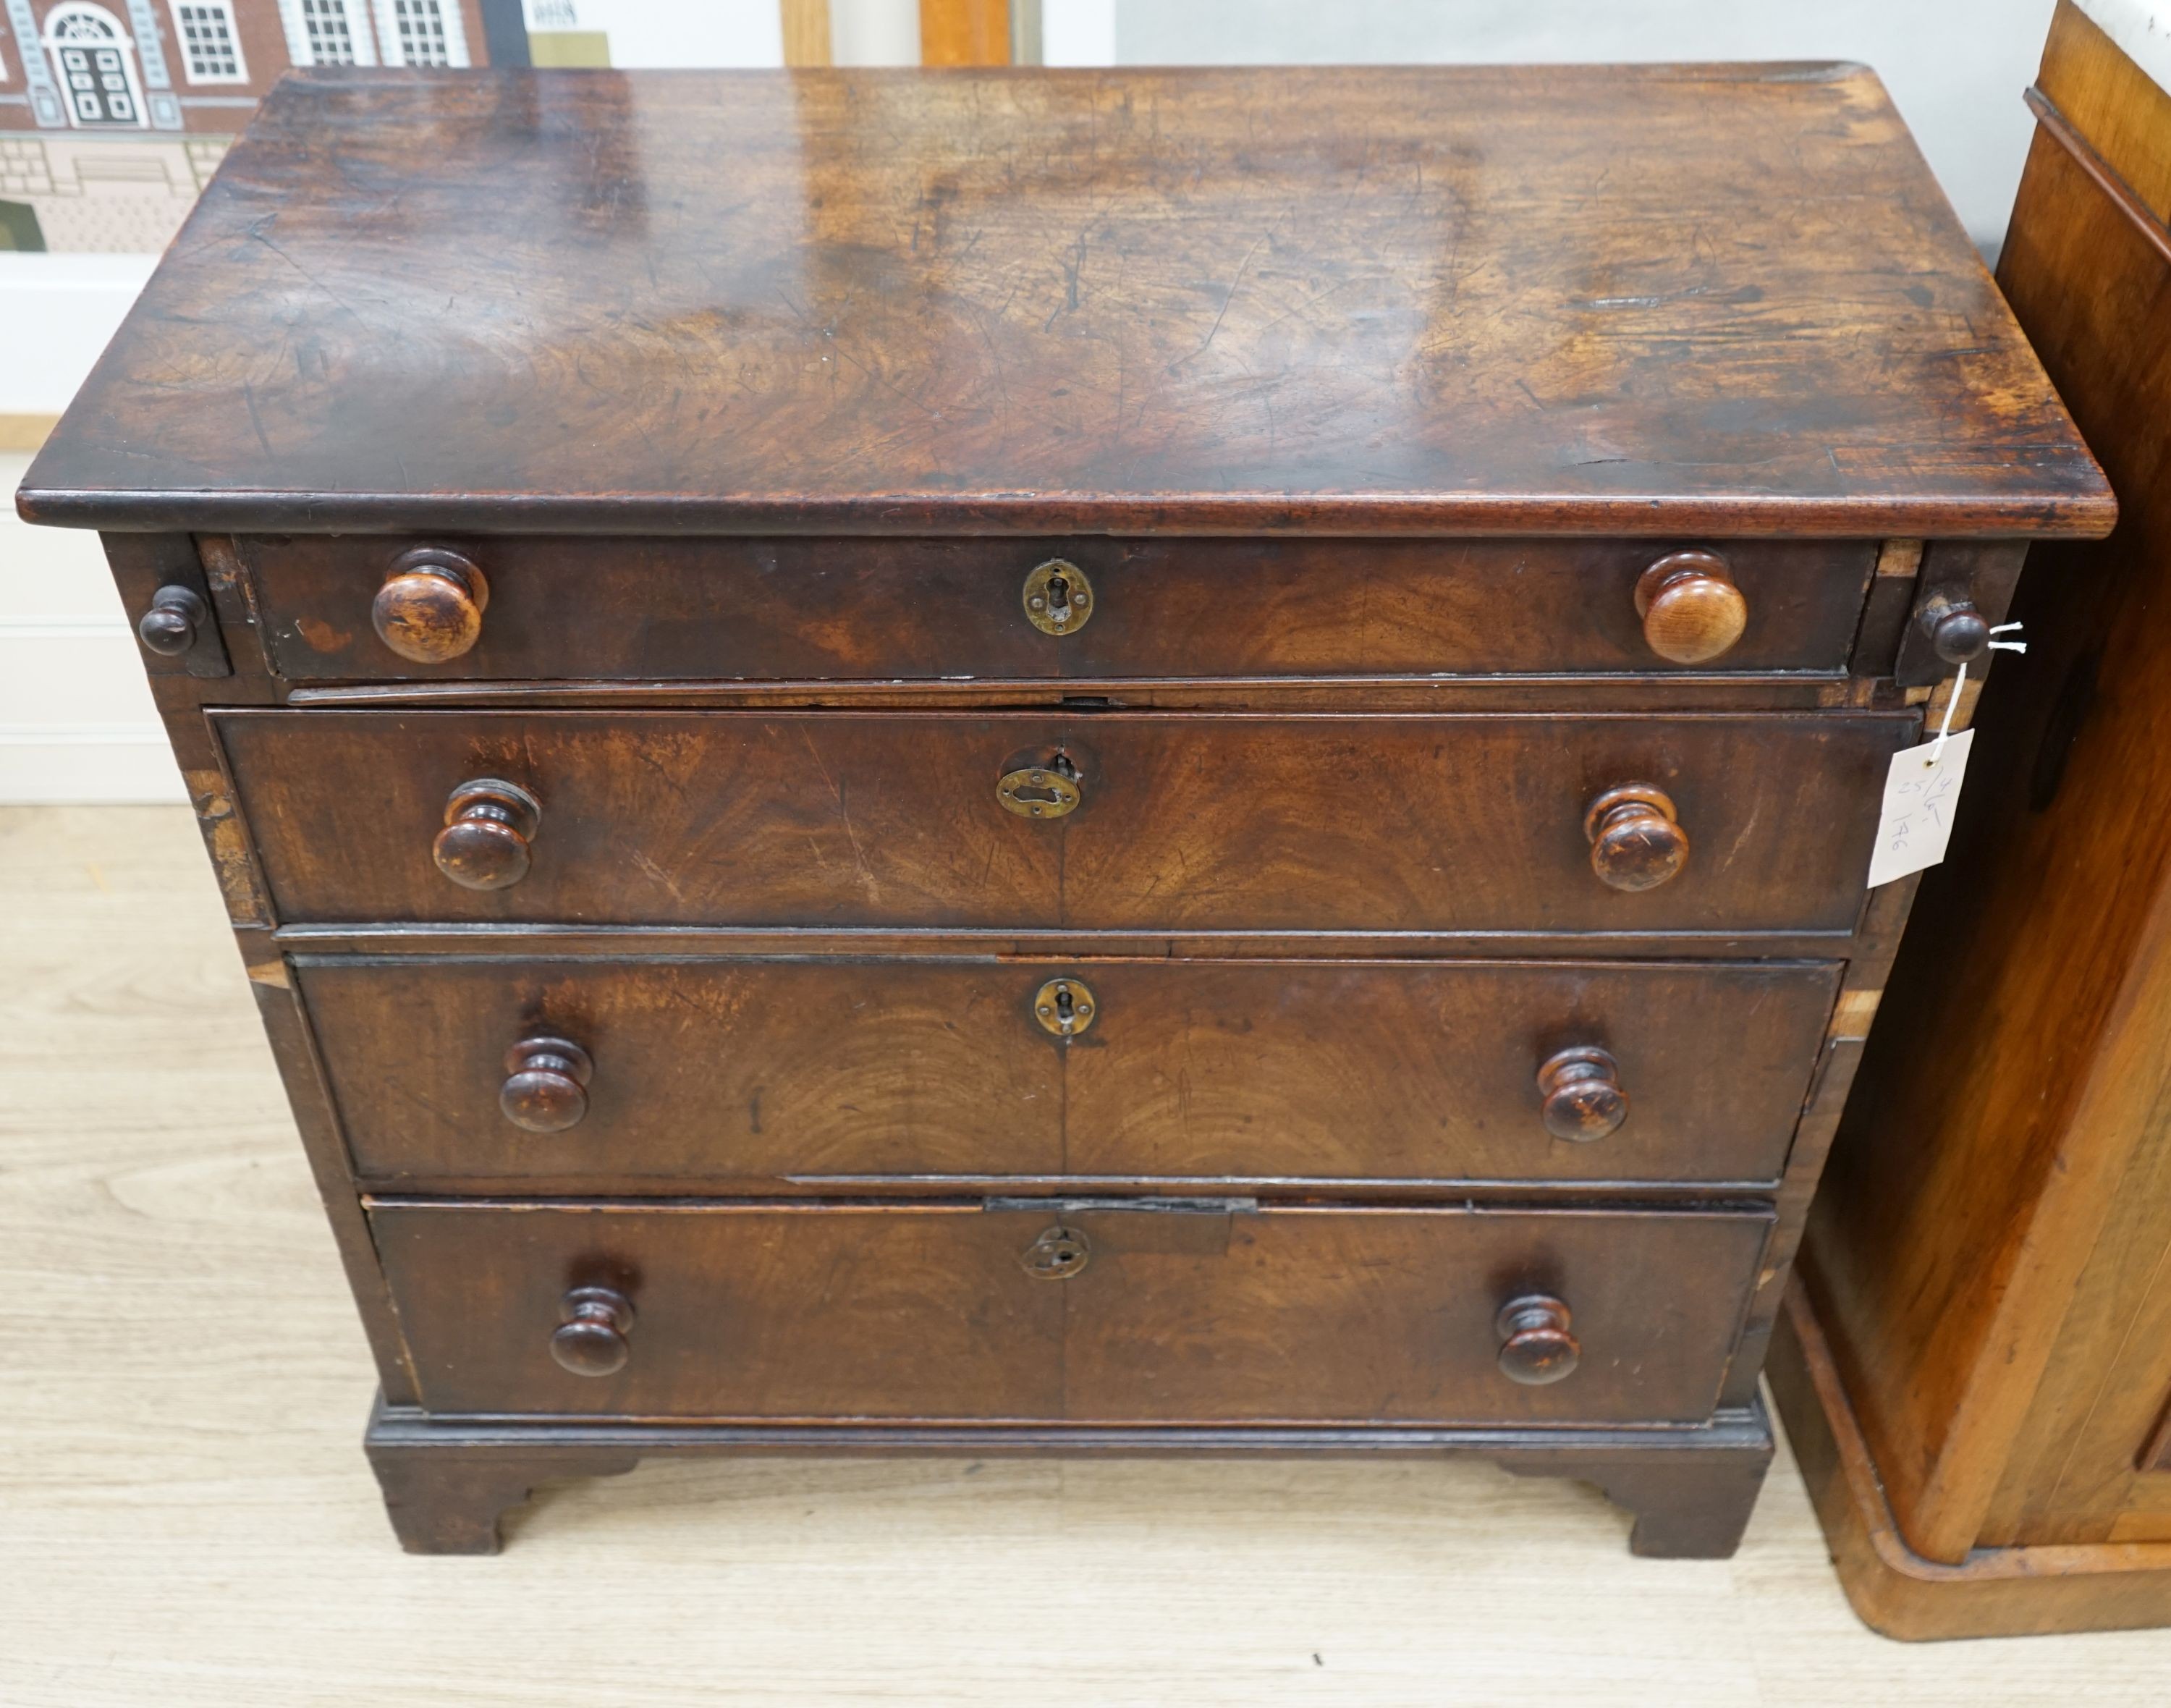 A small 18th century mahogany chest, (formerly a bachelor's chest) width 75cm, depth 37cm, height 71cm